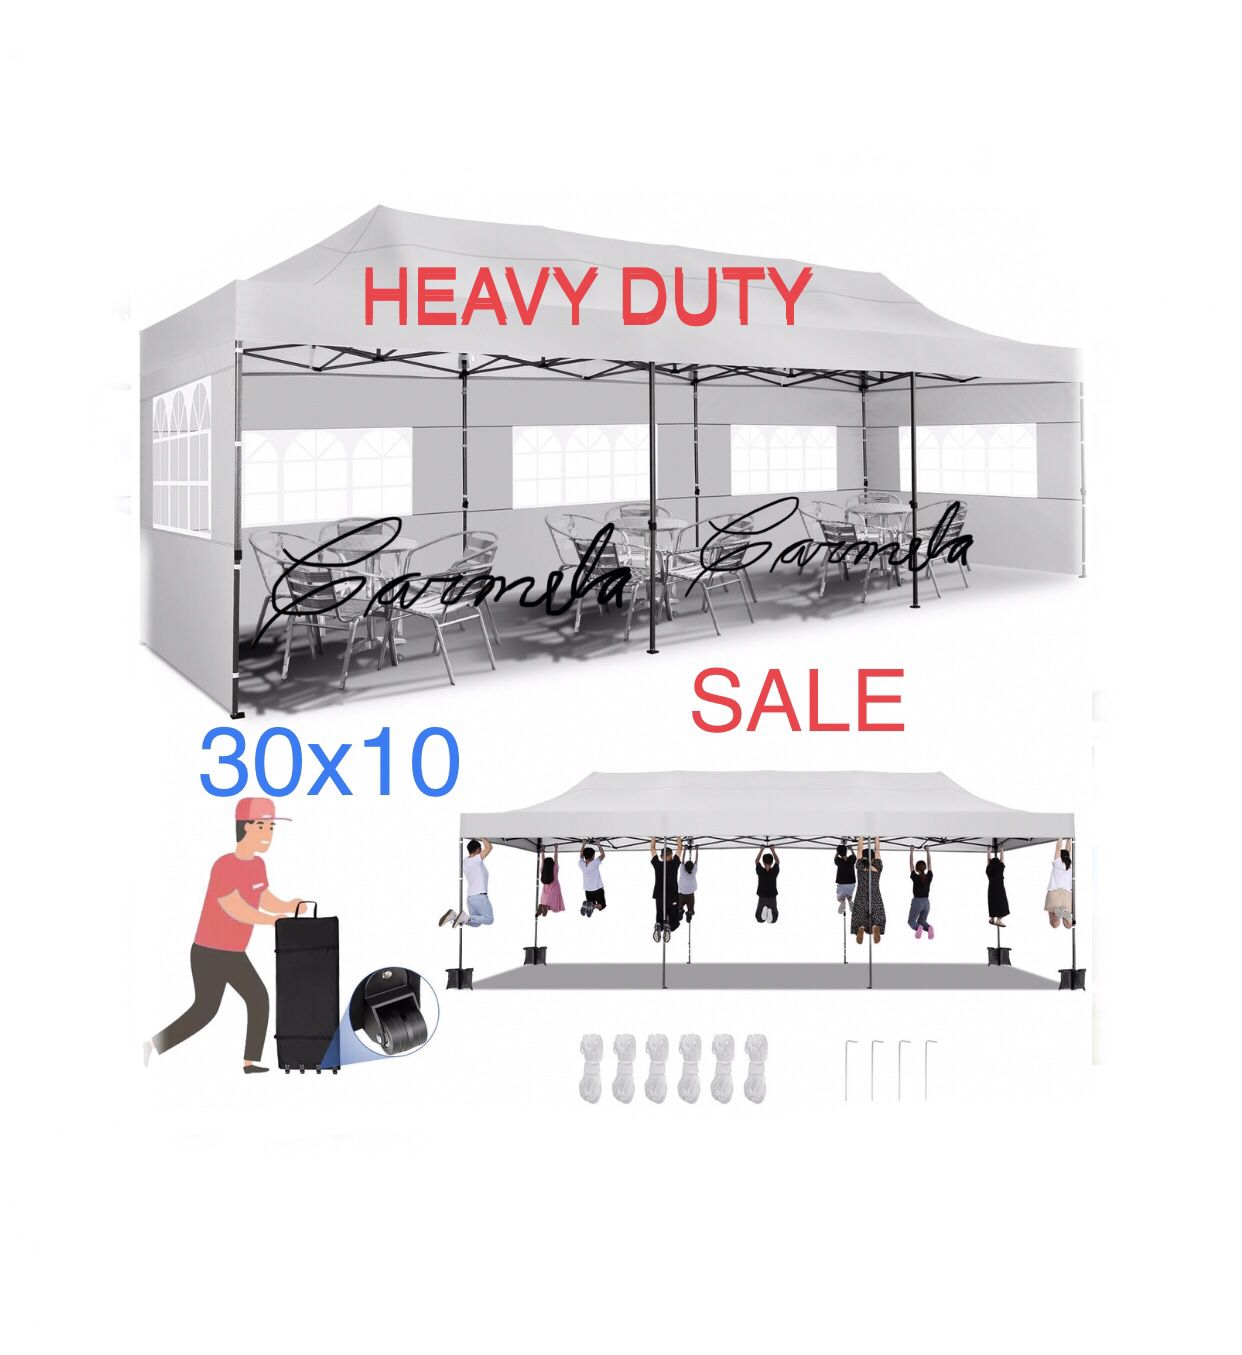 10x30 HEAVY DUTY Pop up  Canopy with 8sidewalls Commercial  Tent UPF 50+ All Weather Waterproof Outdoor Wedding Party Tents Canopy Gazebo Roller Bag 